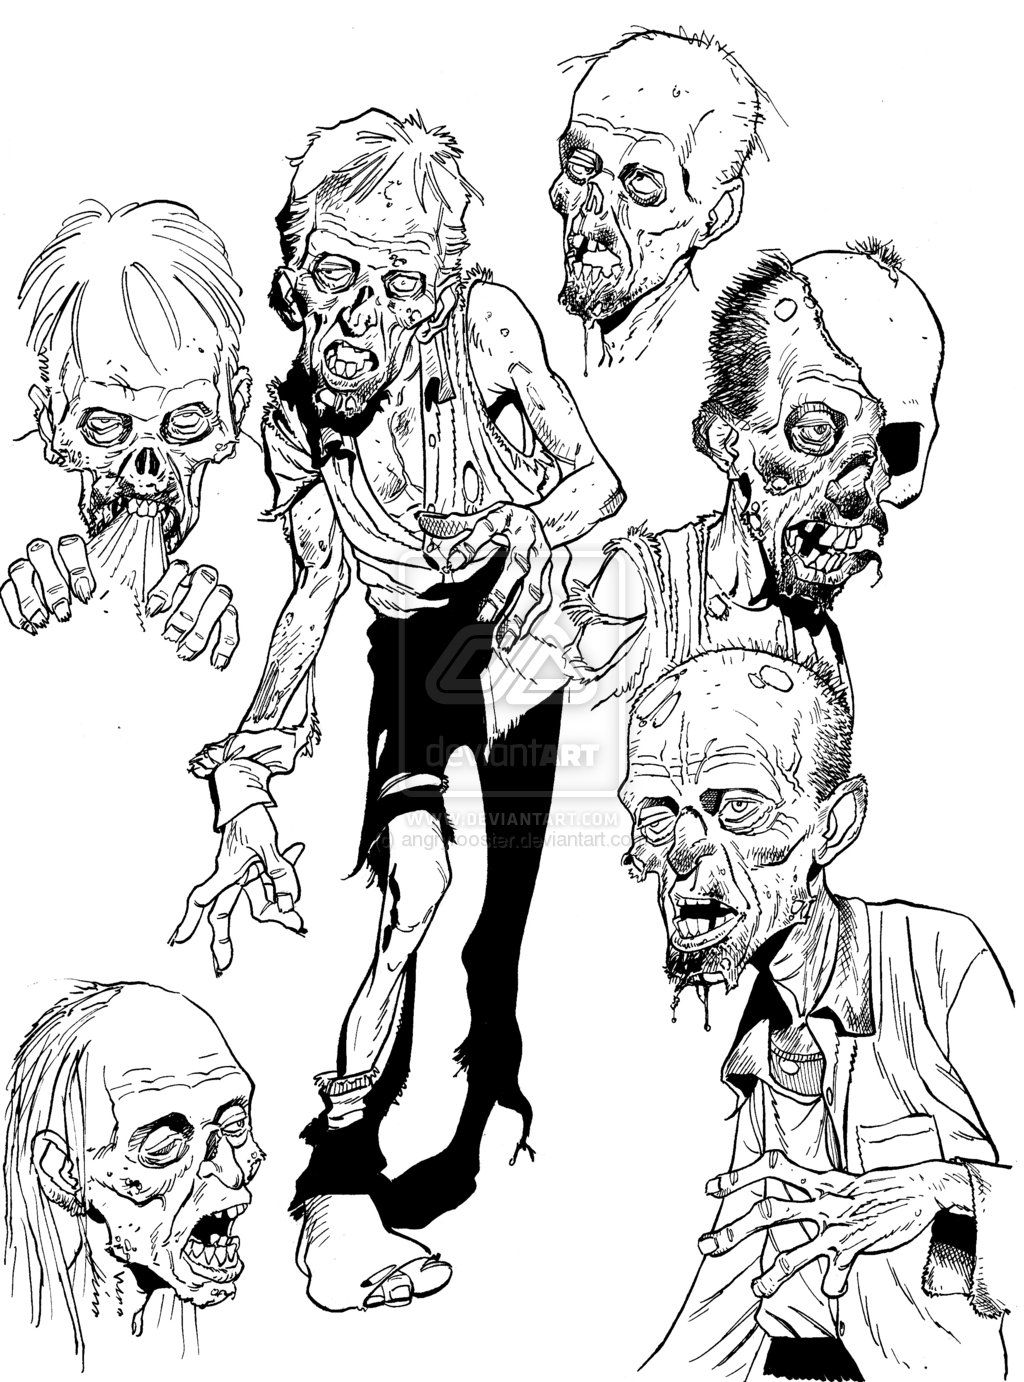 Scary Zombie Coloring Pages - Coloring Home